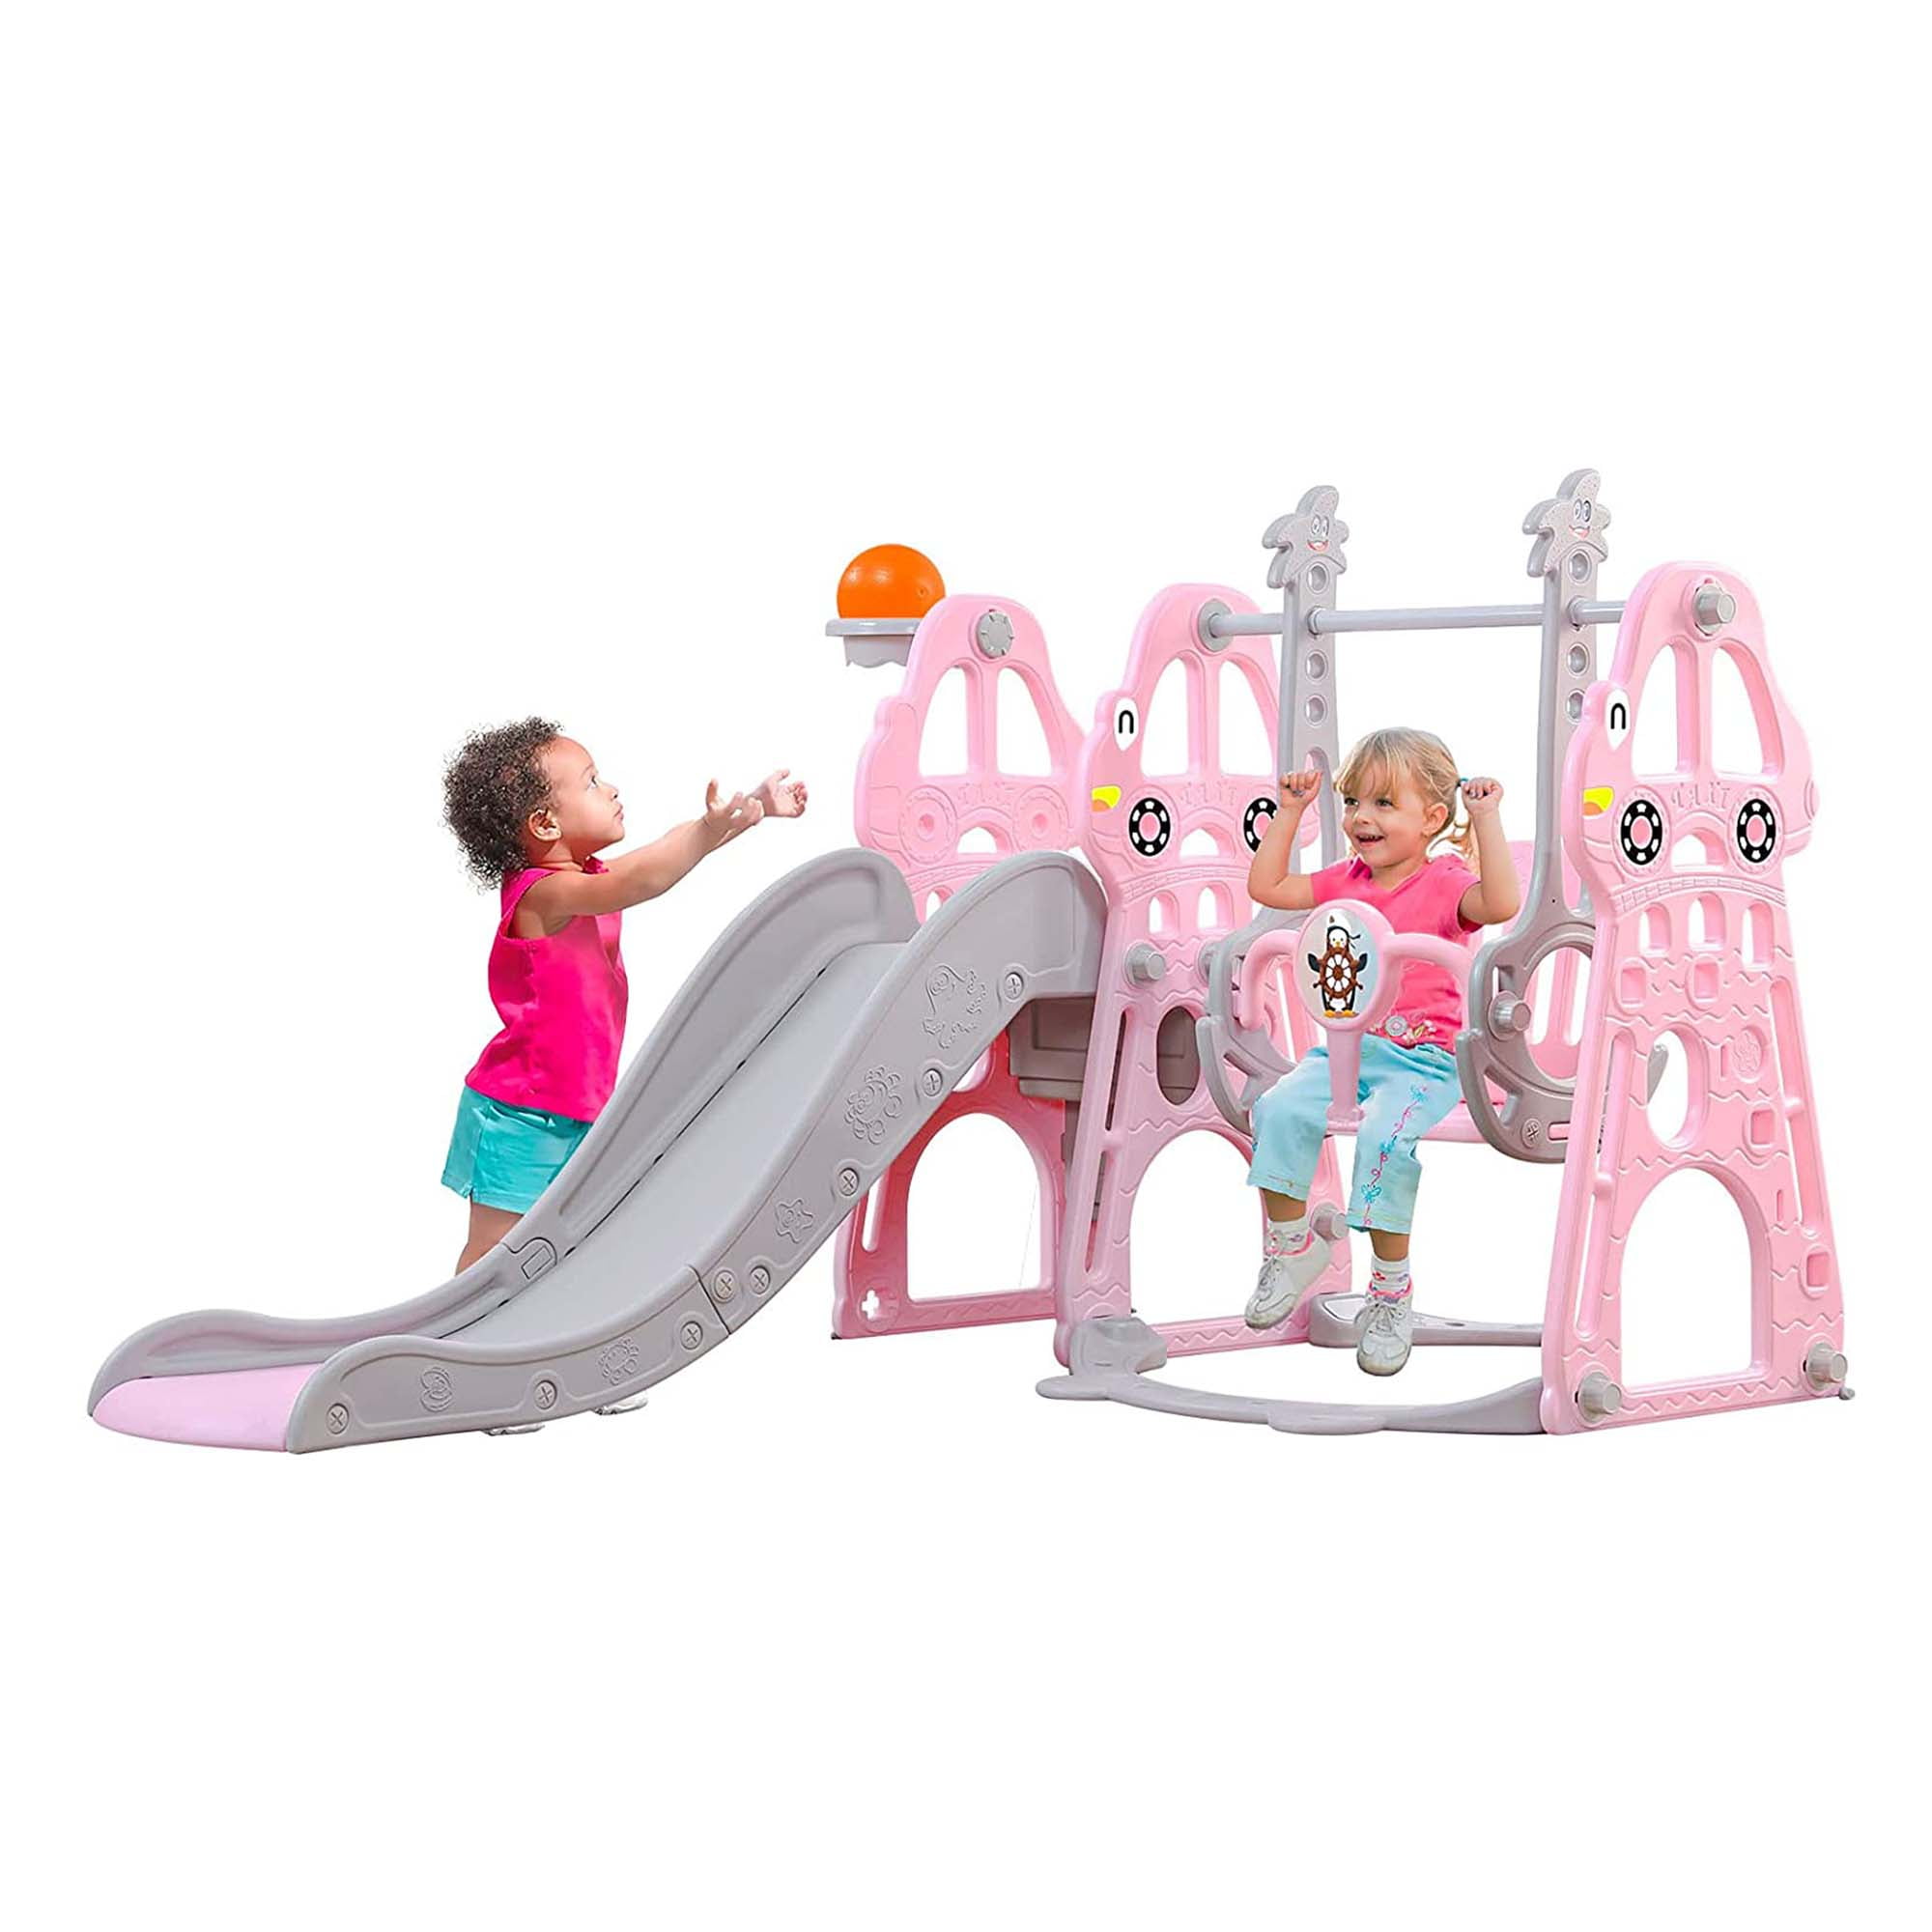 UK 3-5 Day,Multicolour Sturdy Toddler Playground Slipping Slide Climber for Indoor Outdoors Use Kids Slide Children Toy Playset with Basketball Hoop for Outside Games,Children Play Area